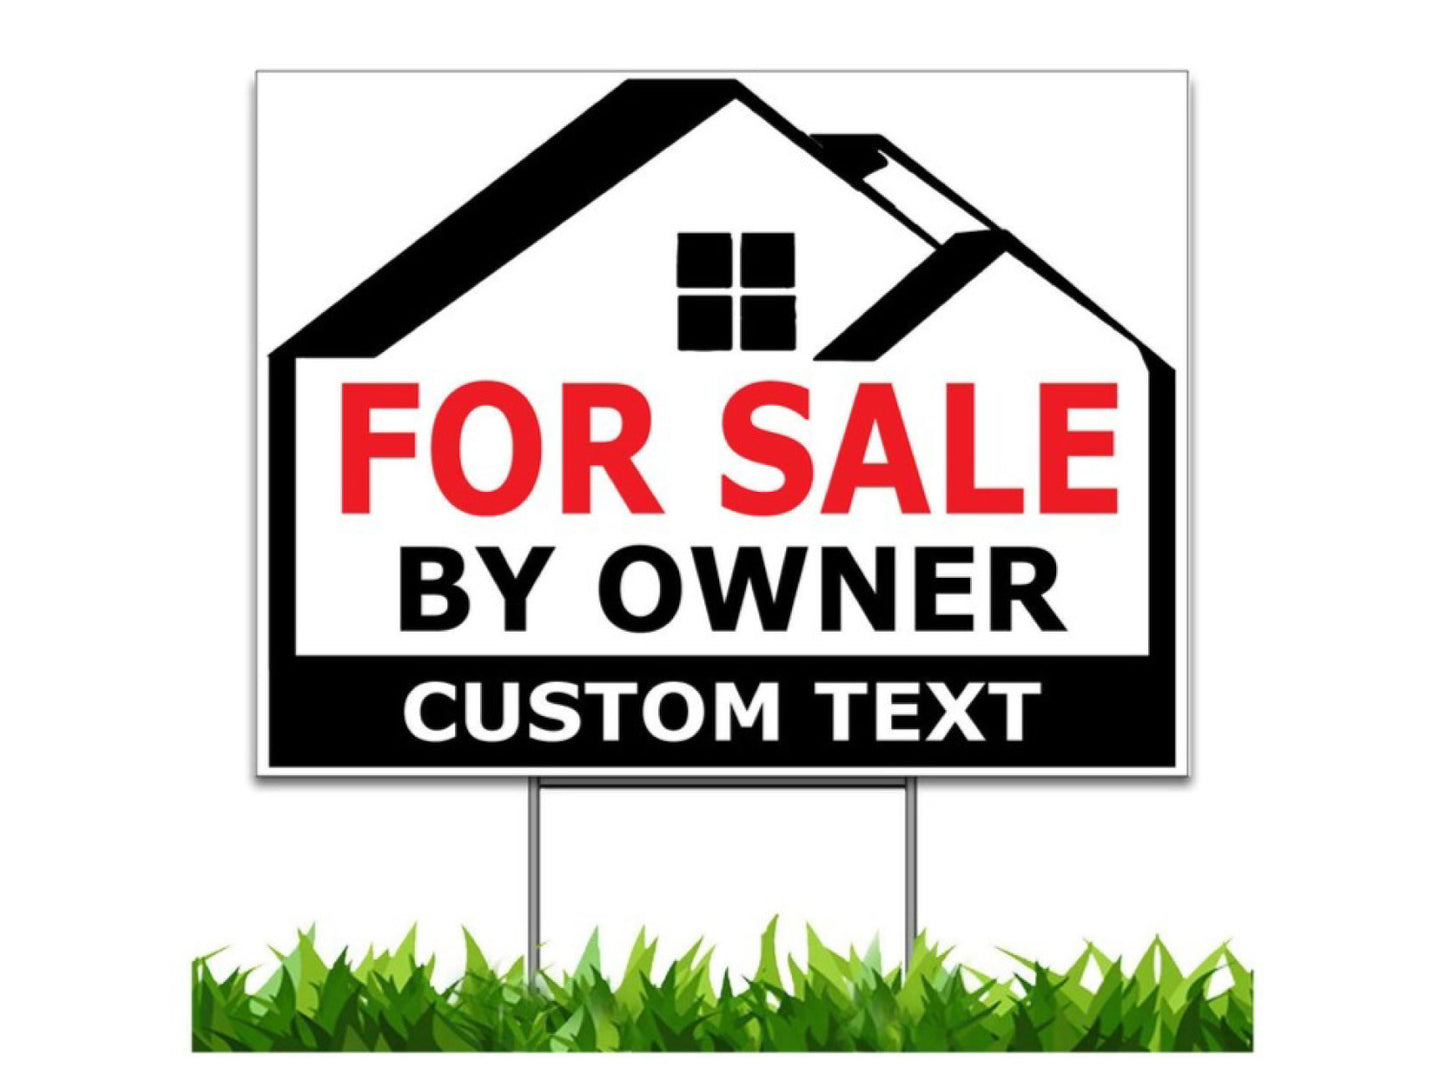 Custom for Sale by Owner, Yard Sign, 36 x 24 inches, v2